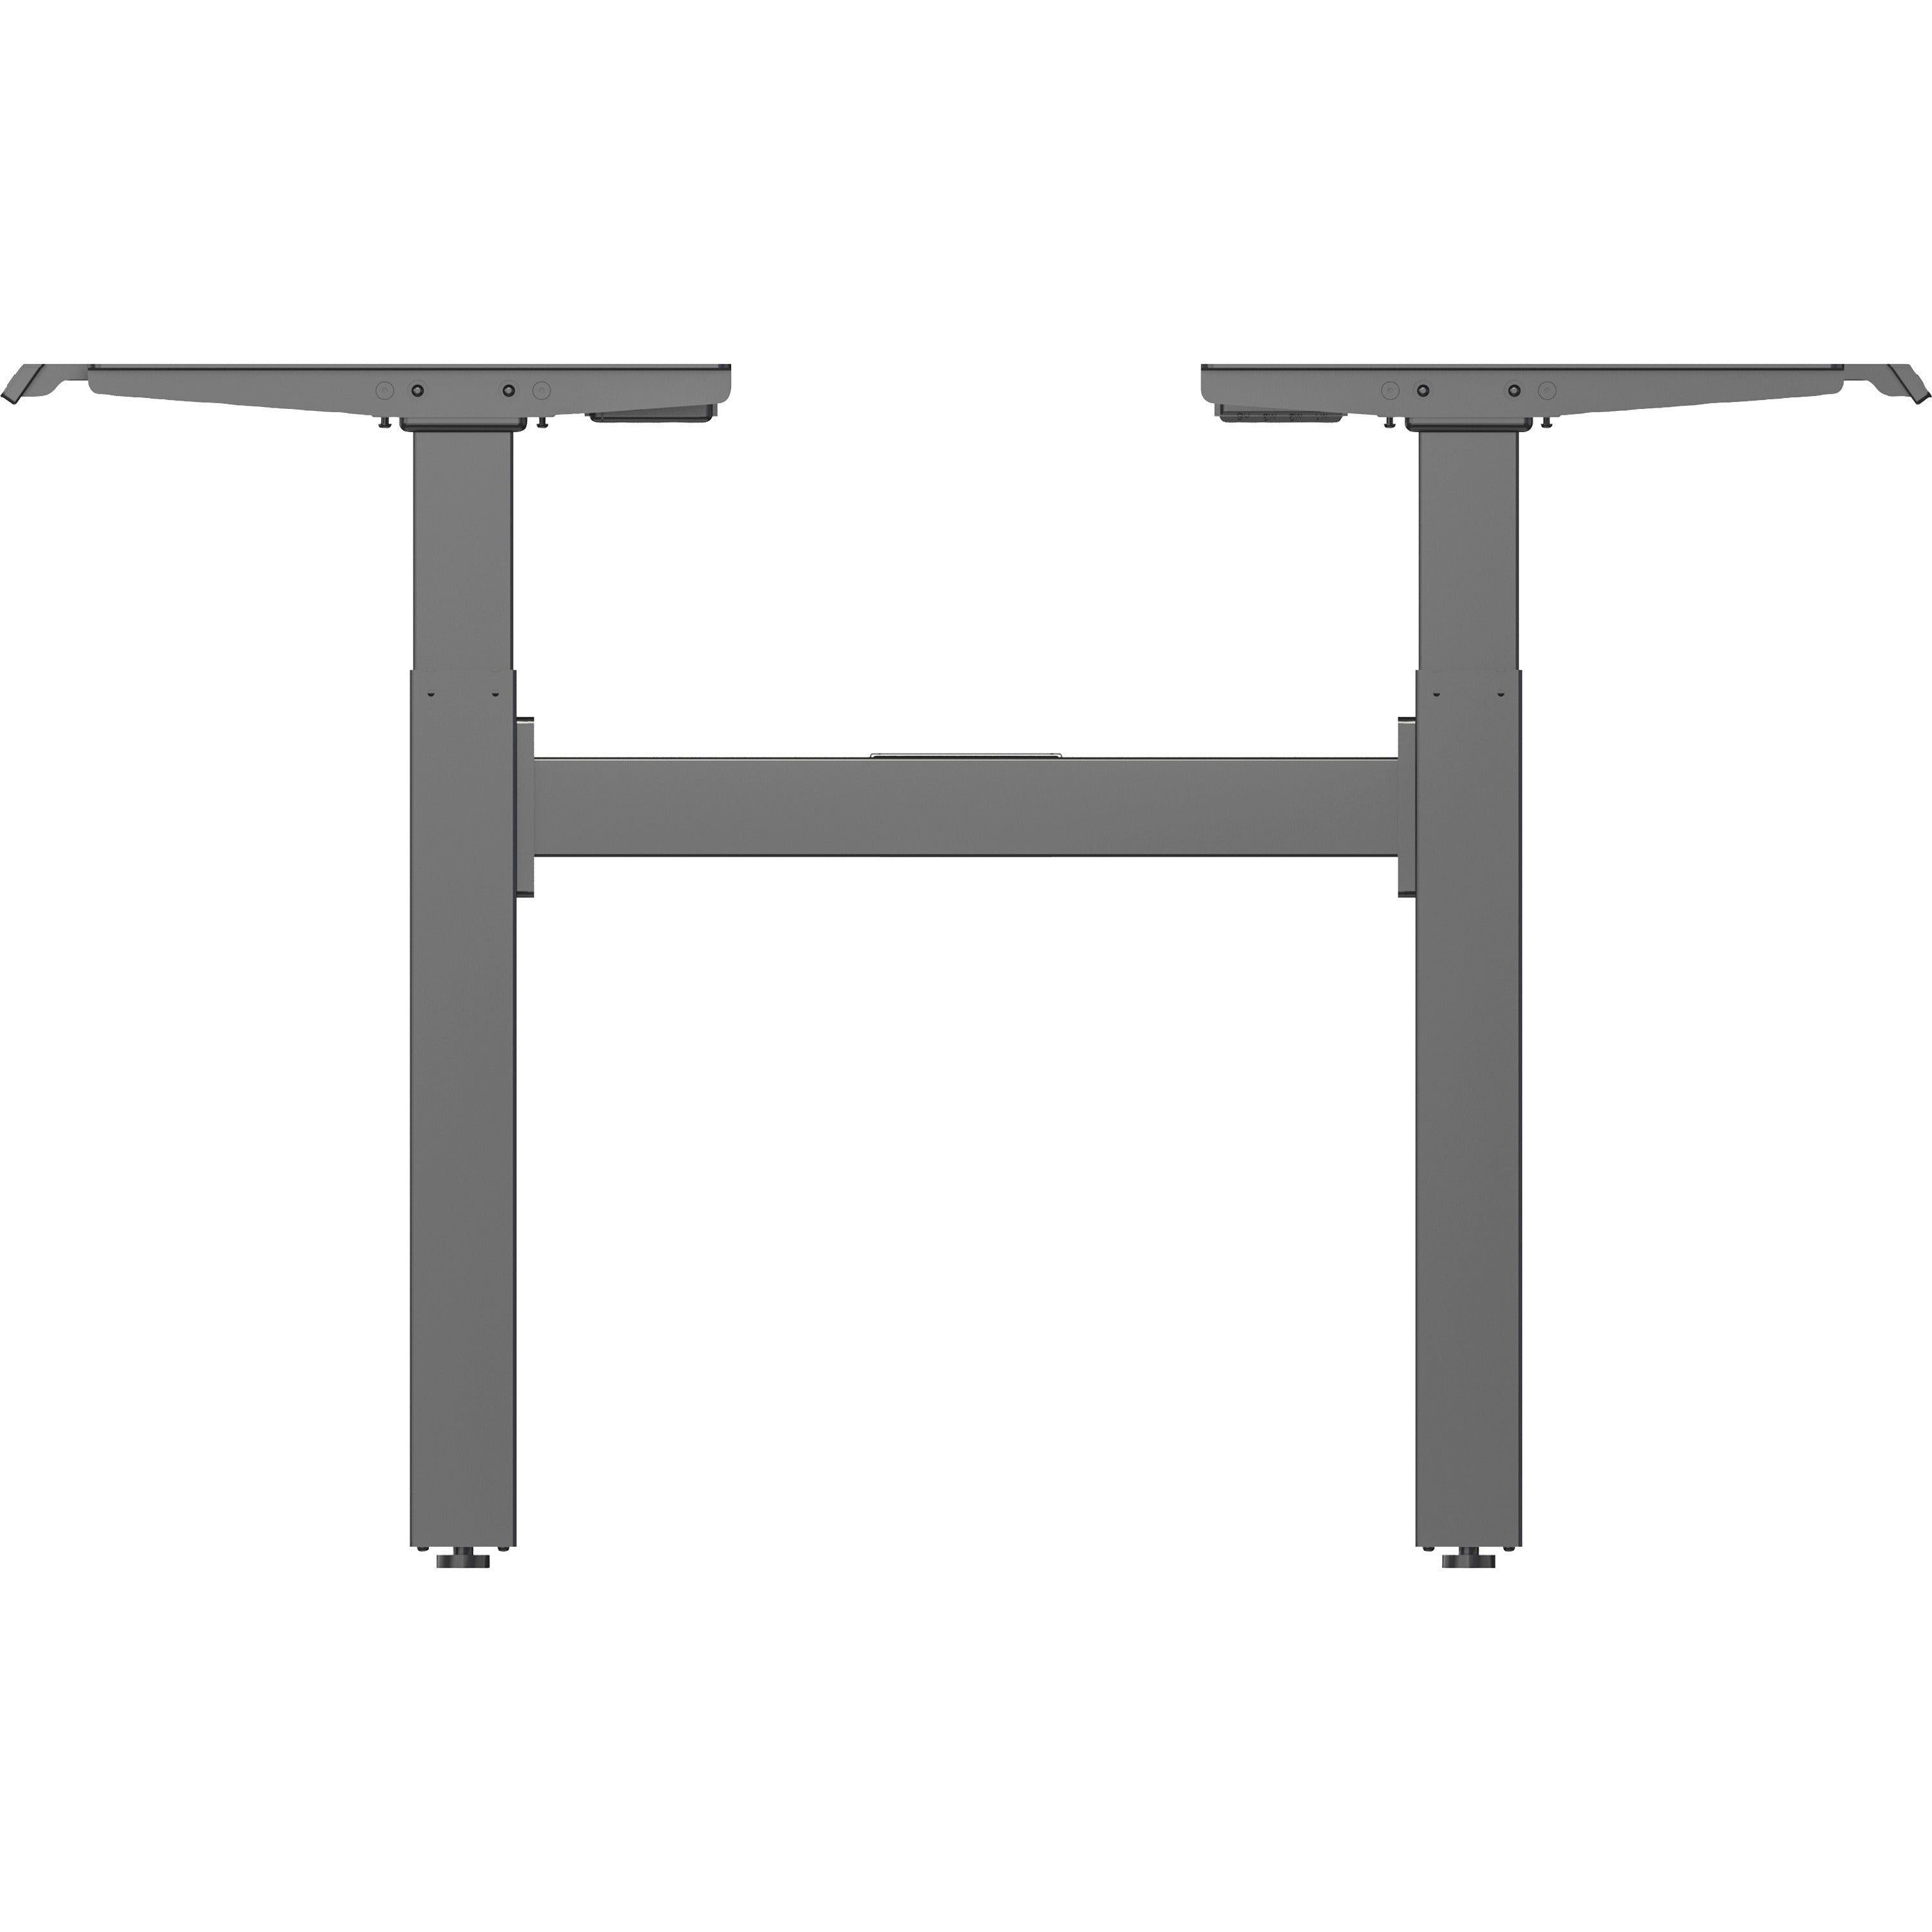 lorell-2-tier-sit-stand-double-base-220-lb-capacity-2830-to-46-adjustment-71-height-x-4250-width-x-22-depth-assembly-required-1-each_llr25959 - 3